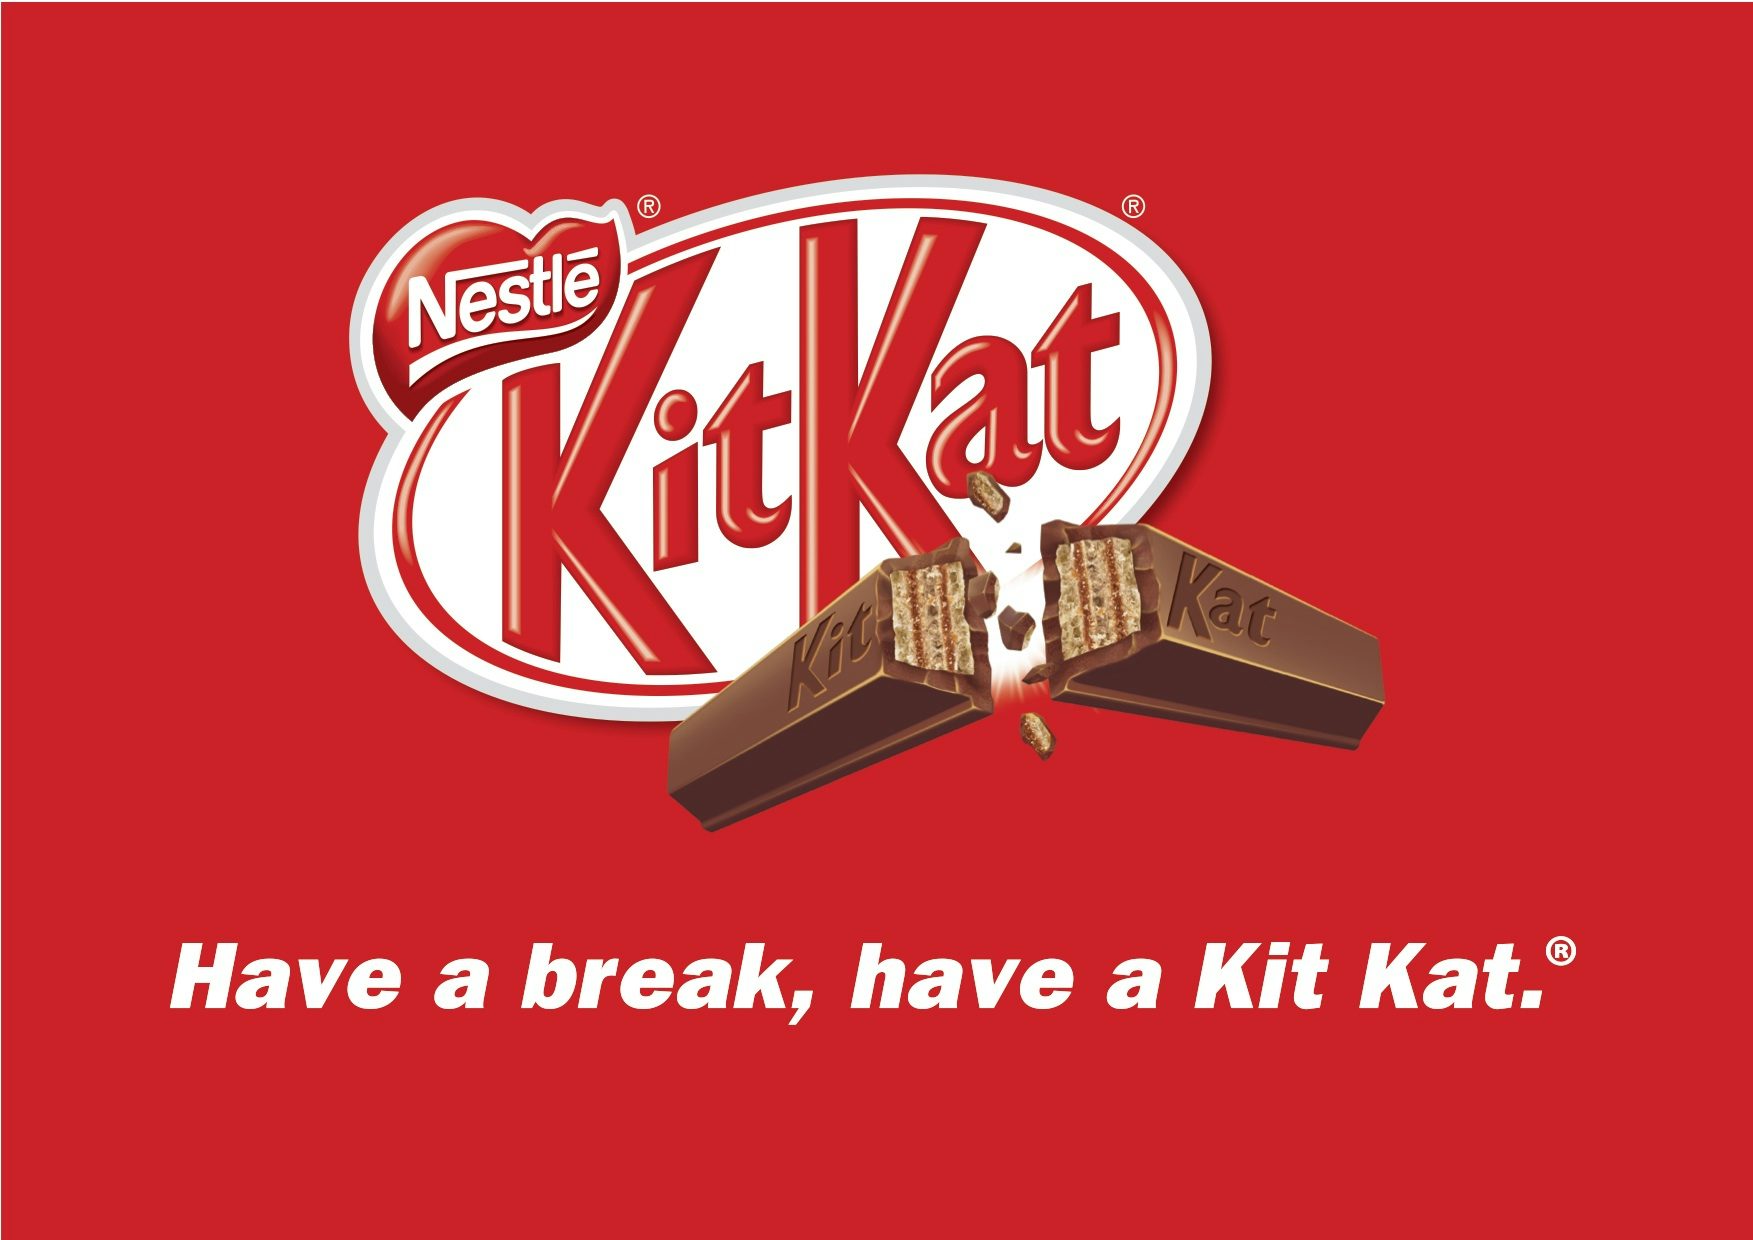 Kit Kat looks to set pulses racing with ‘cops and robbers’ ad